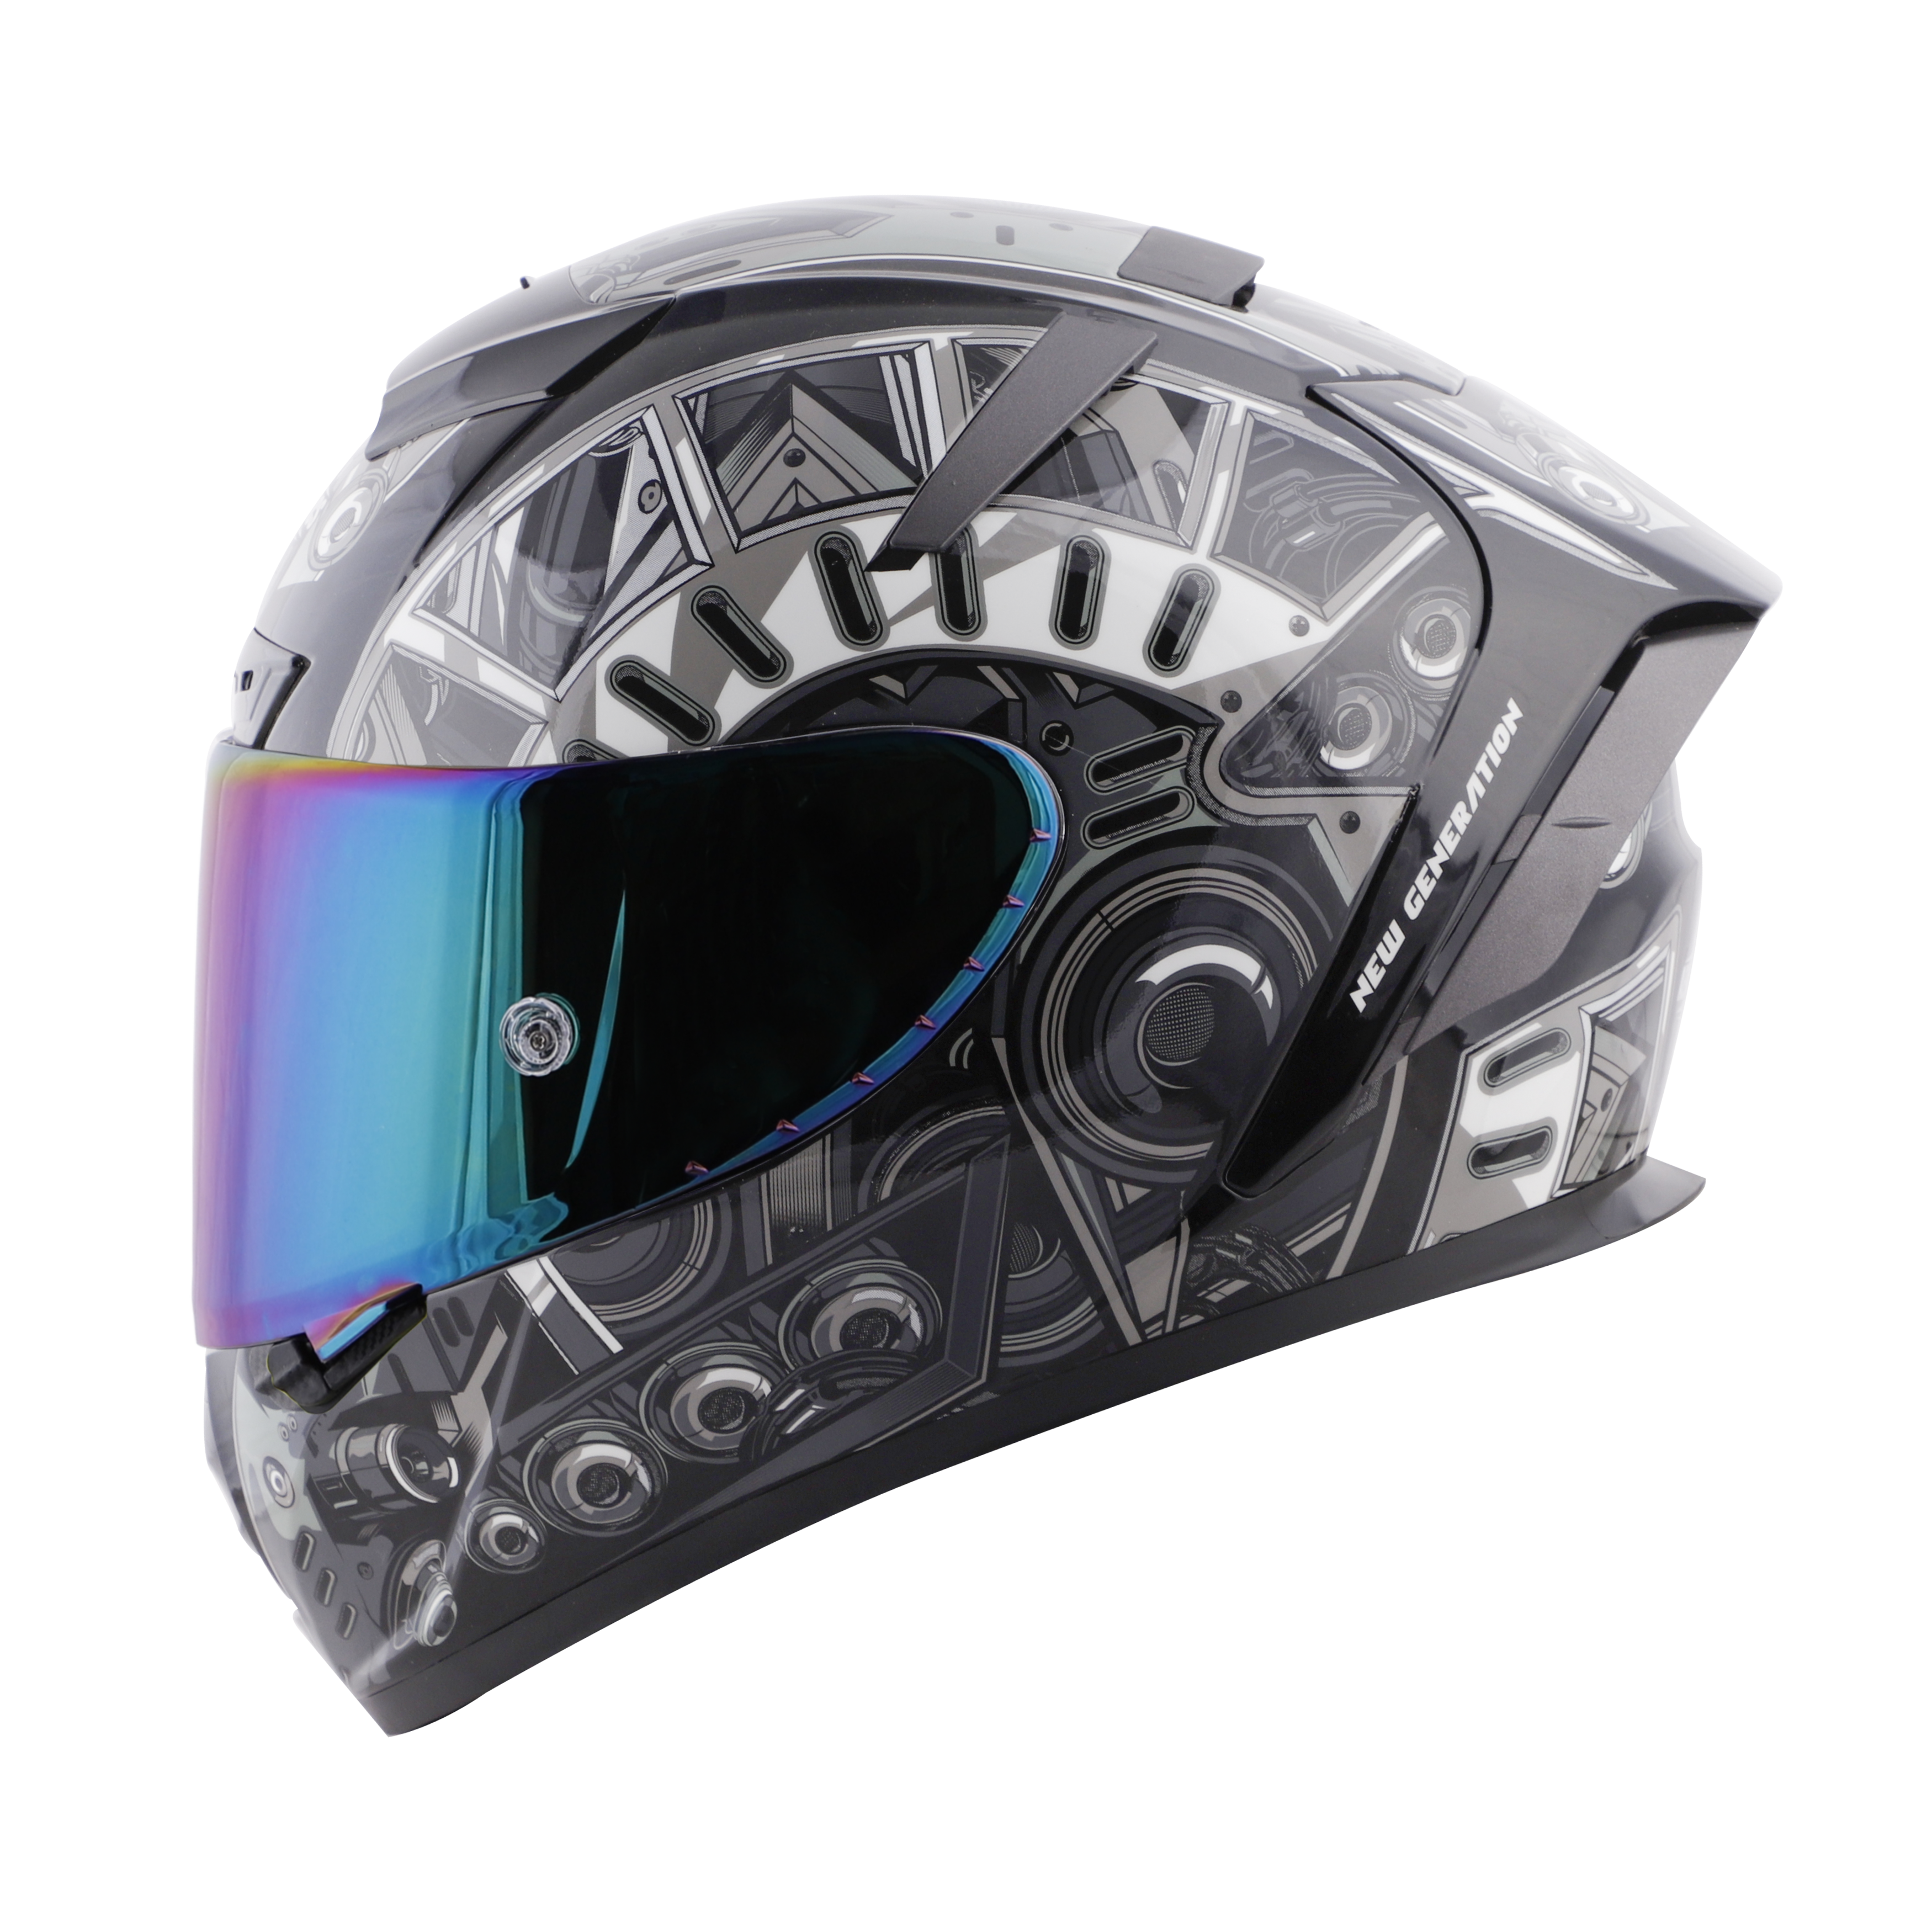 SA-2 TERMINATOR 2.0 GLOSSY BLACK WITH GREY FITTED WITH CLEAR VISOR EXTRA RAINBOW CHROME VISOR FREE (WITH ANTI-FOG SHIELD HOLDER)